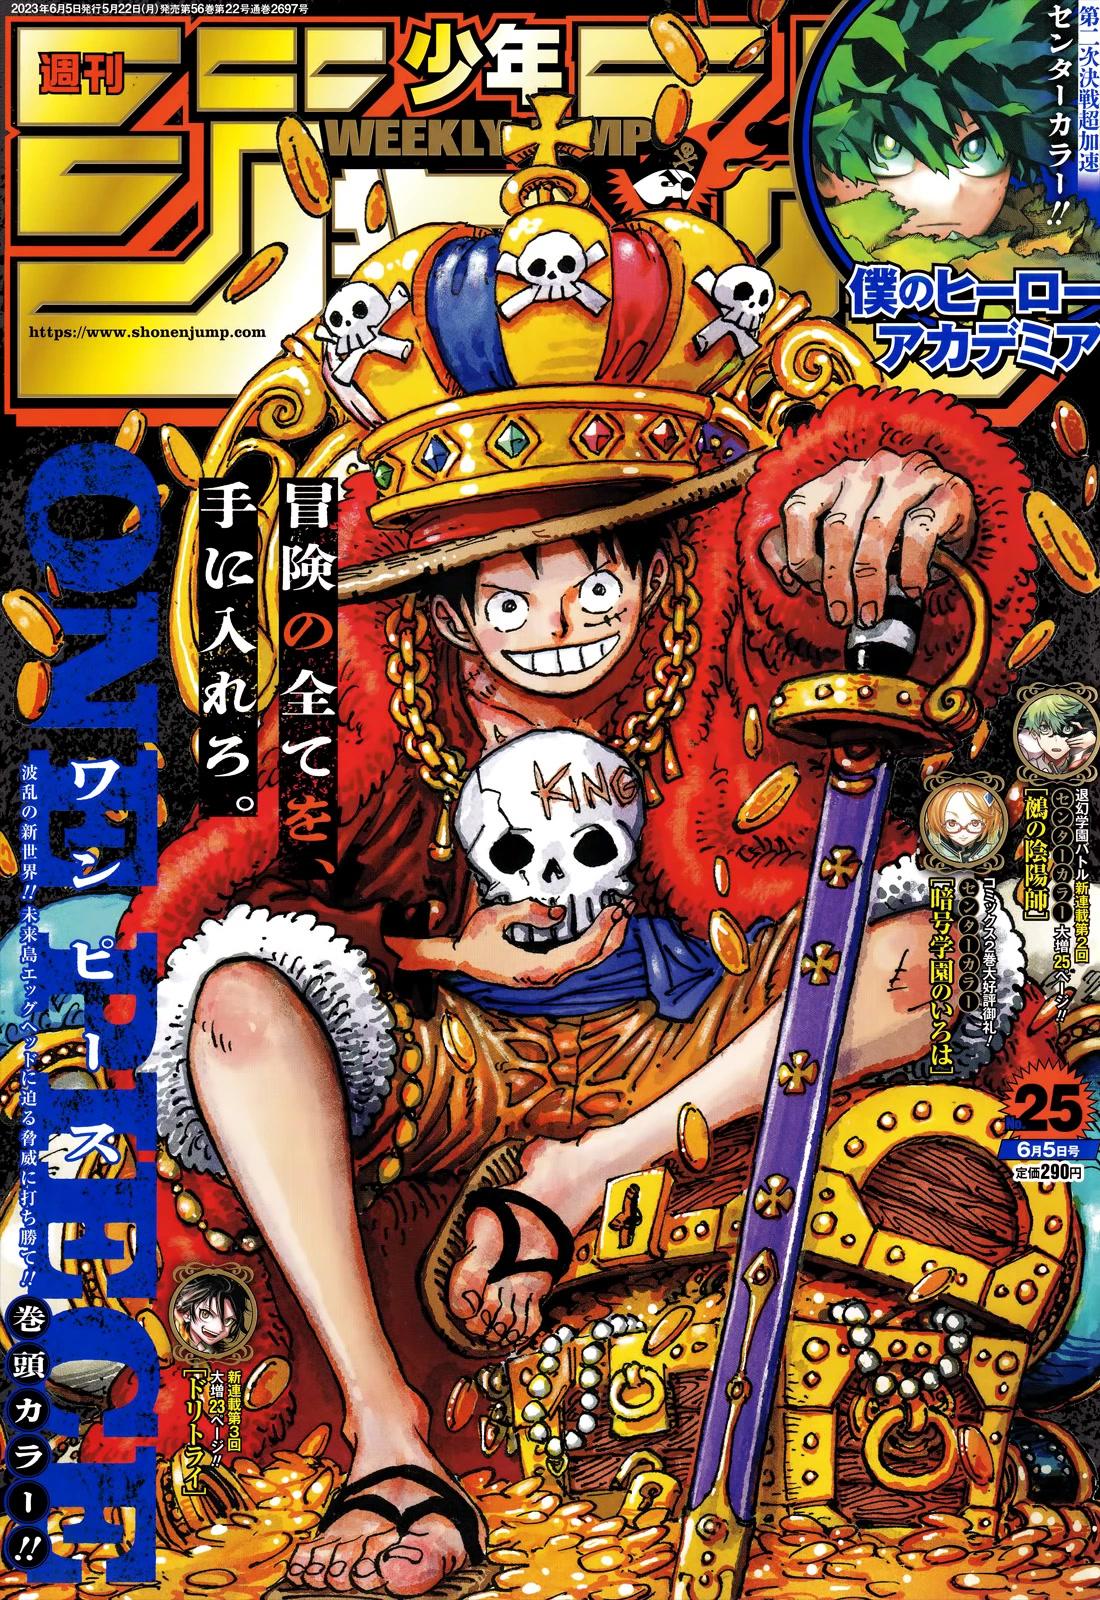 Read One Piece Chapter 1084: The Attempted Murder Of A Celestial Dragon On  Mangakakalot